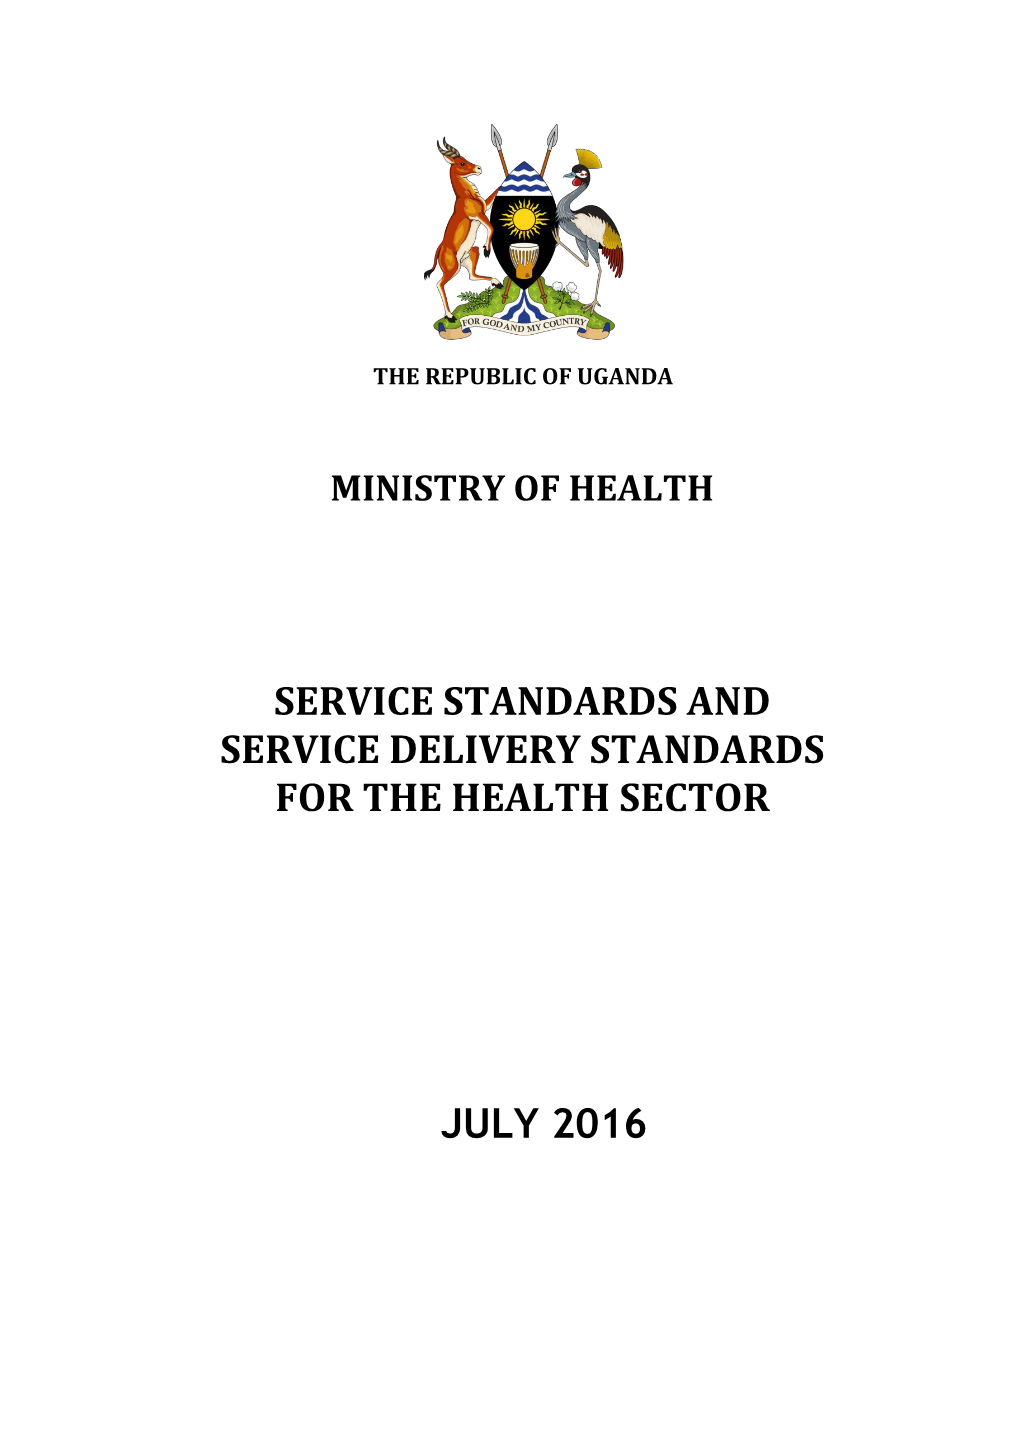 Service Standards and Service Delivery Standards for the Health Sector July